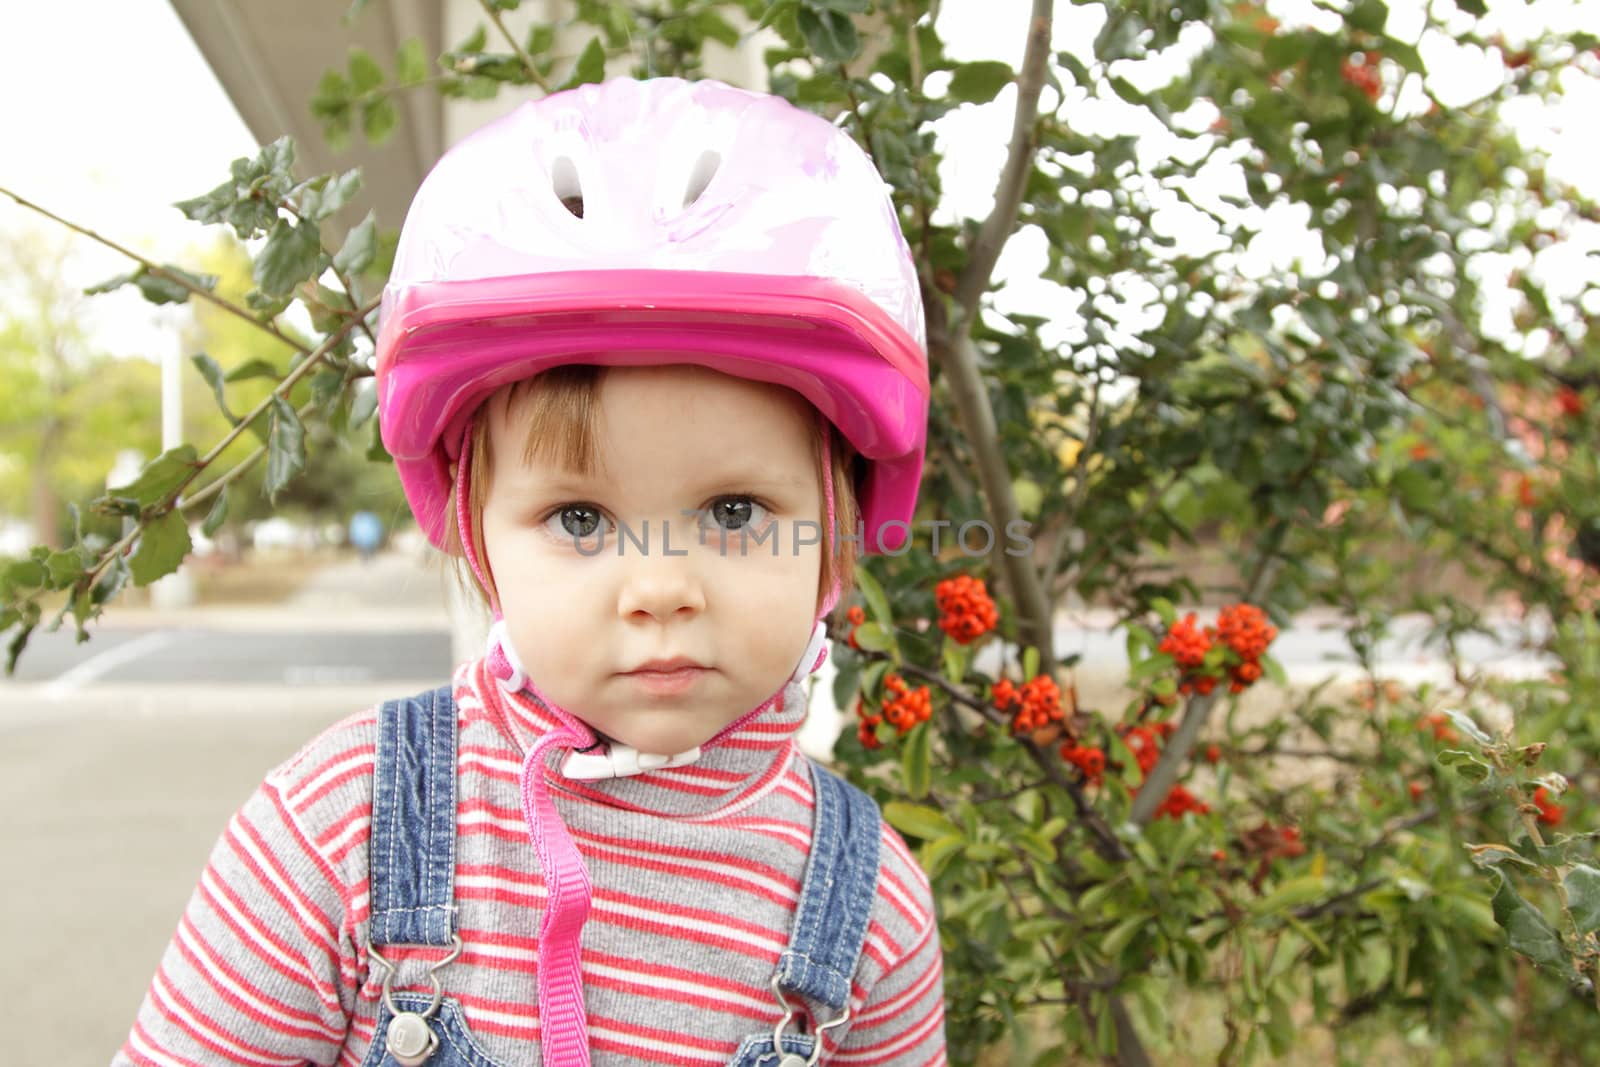 Cute little girl with pink bicycle helmet outdoors